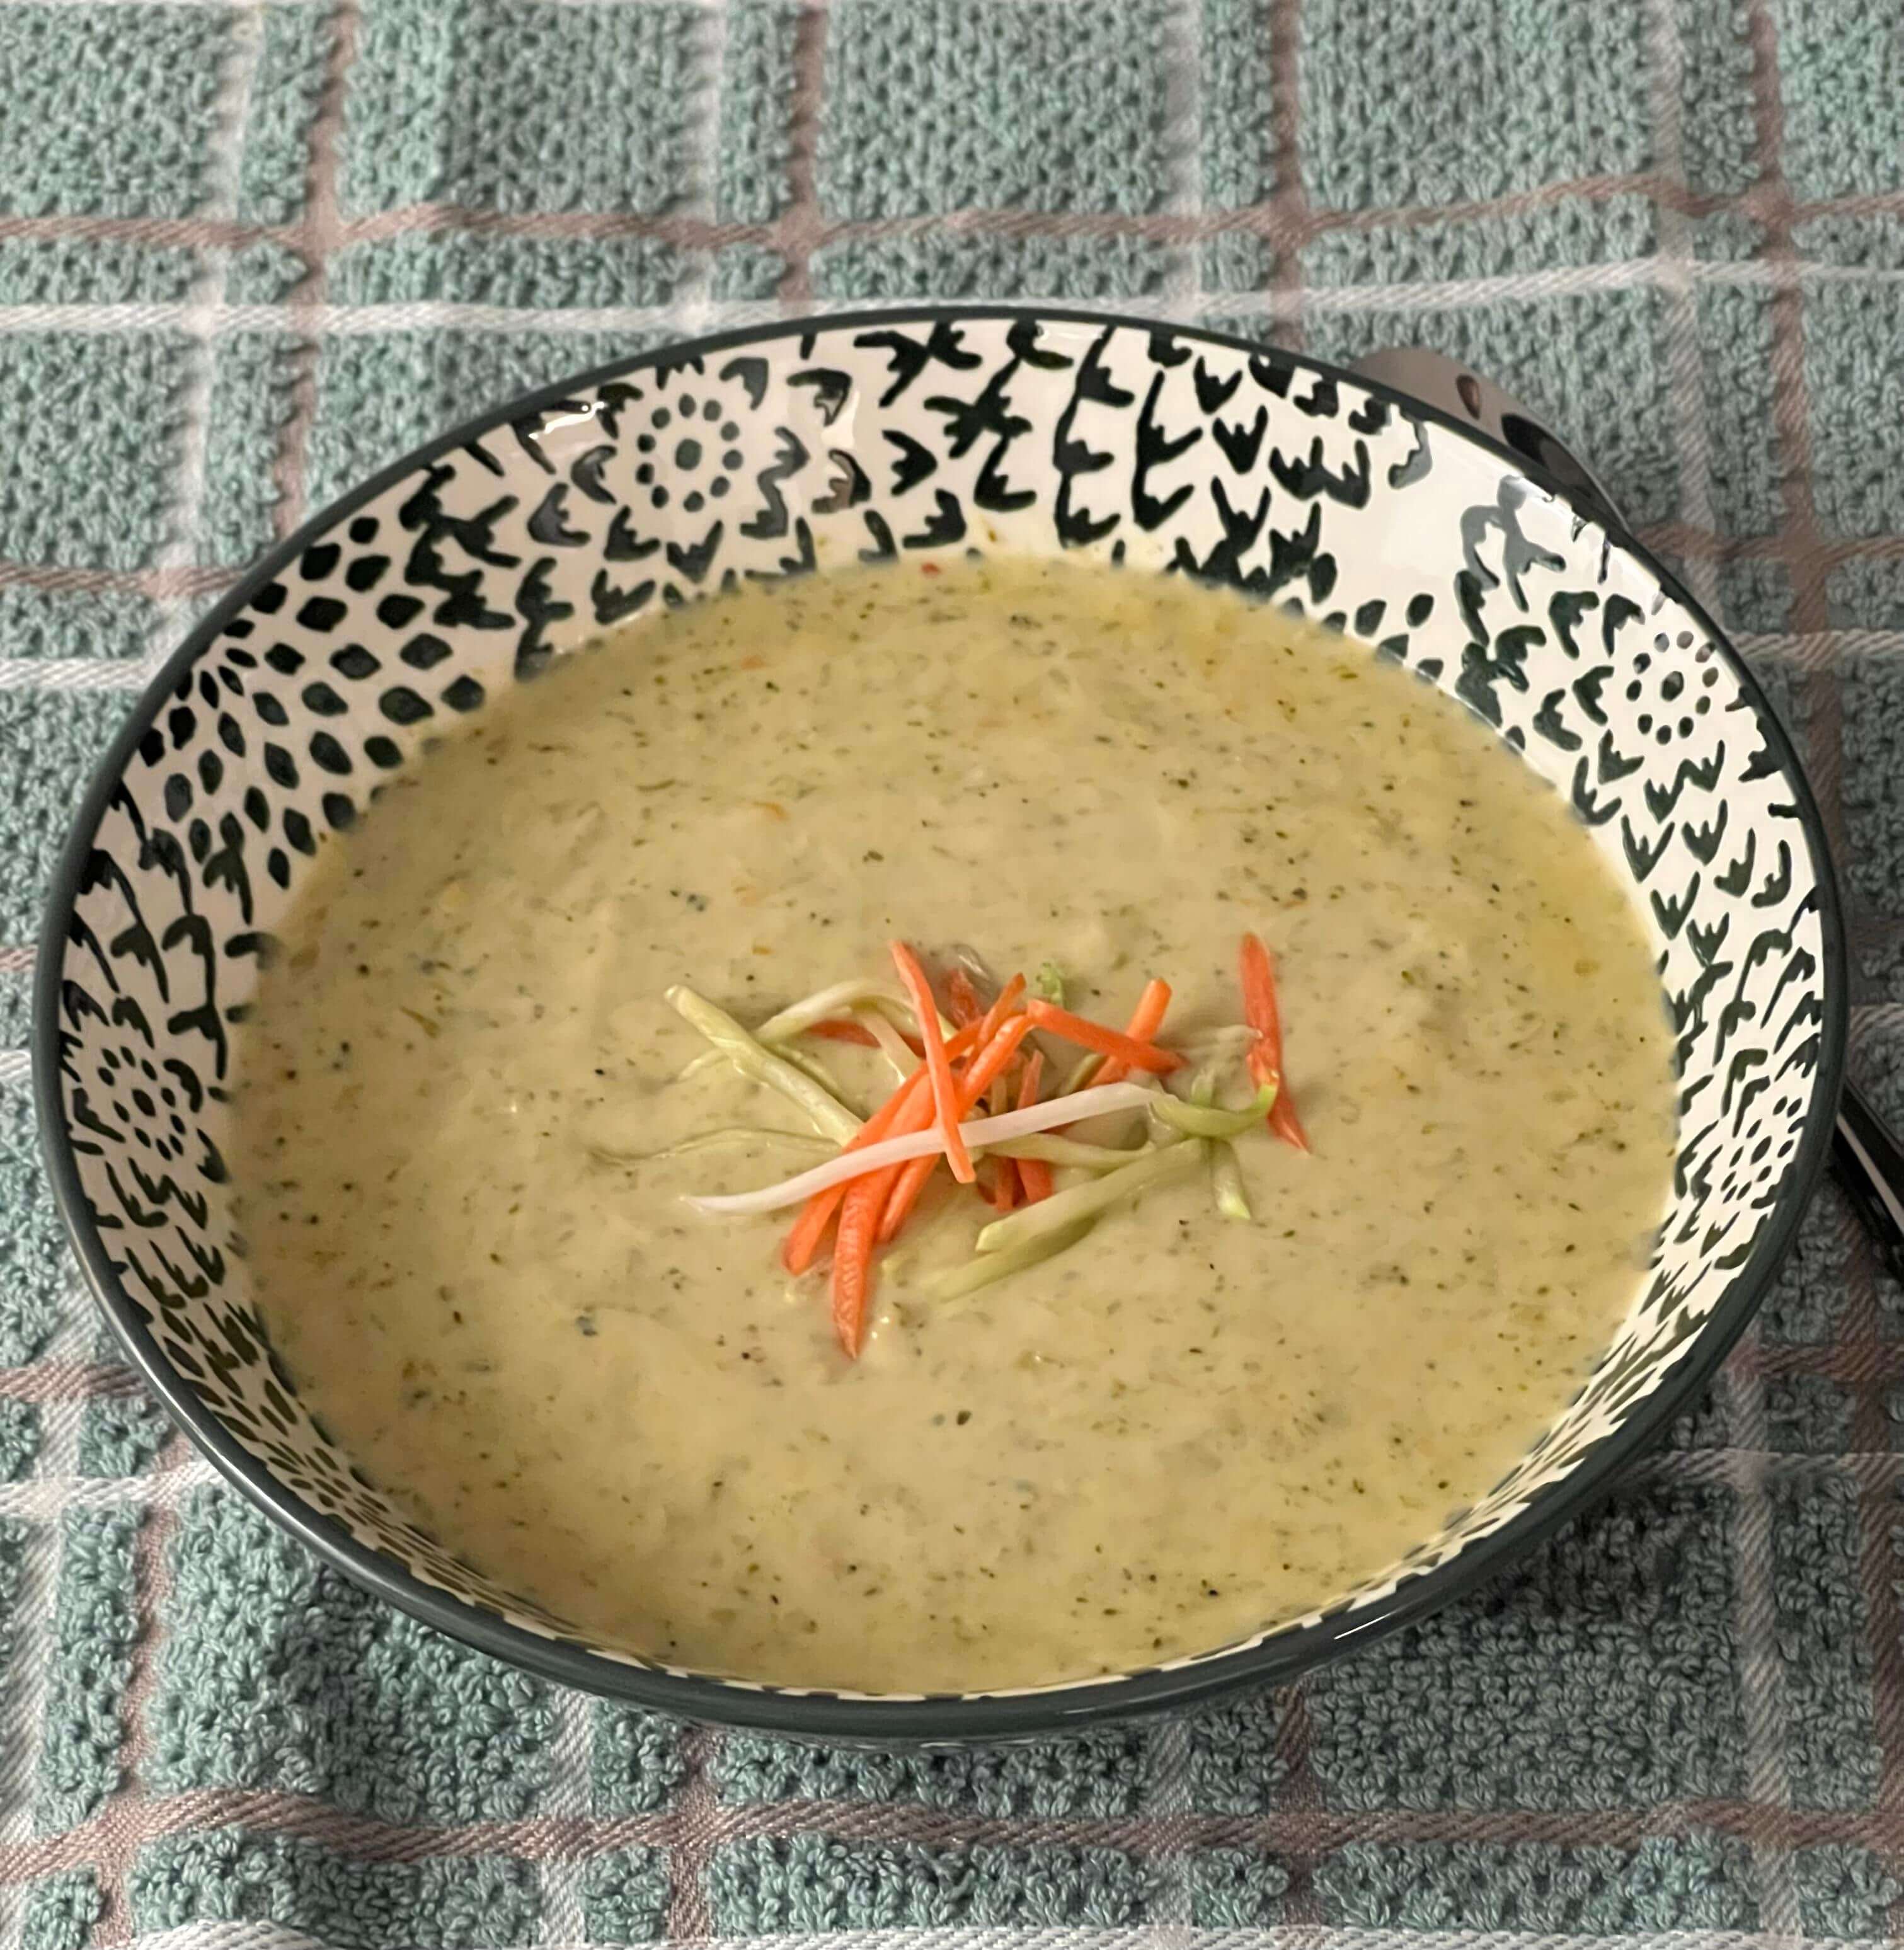 Instant Pot Broccoli Cheddar Cheese Soup